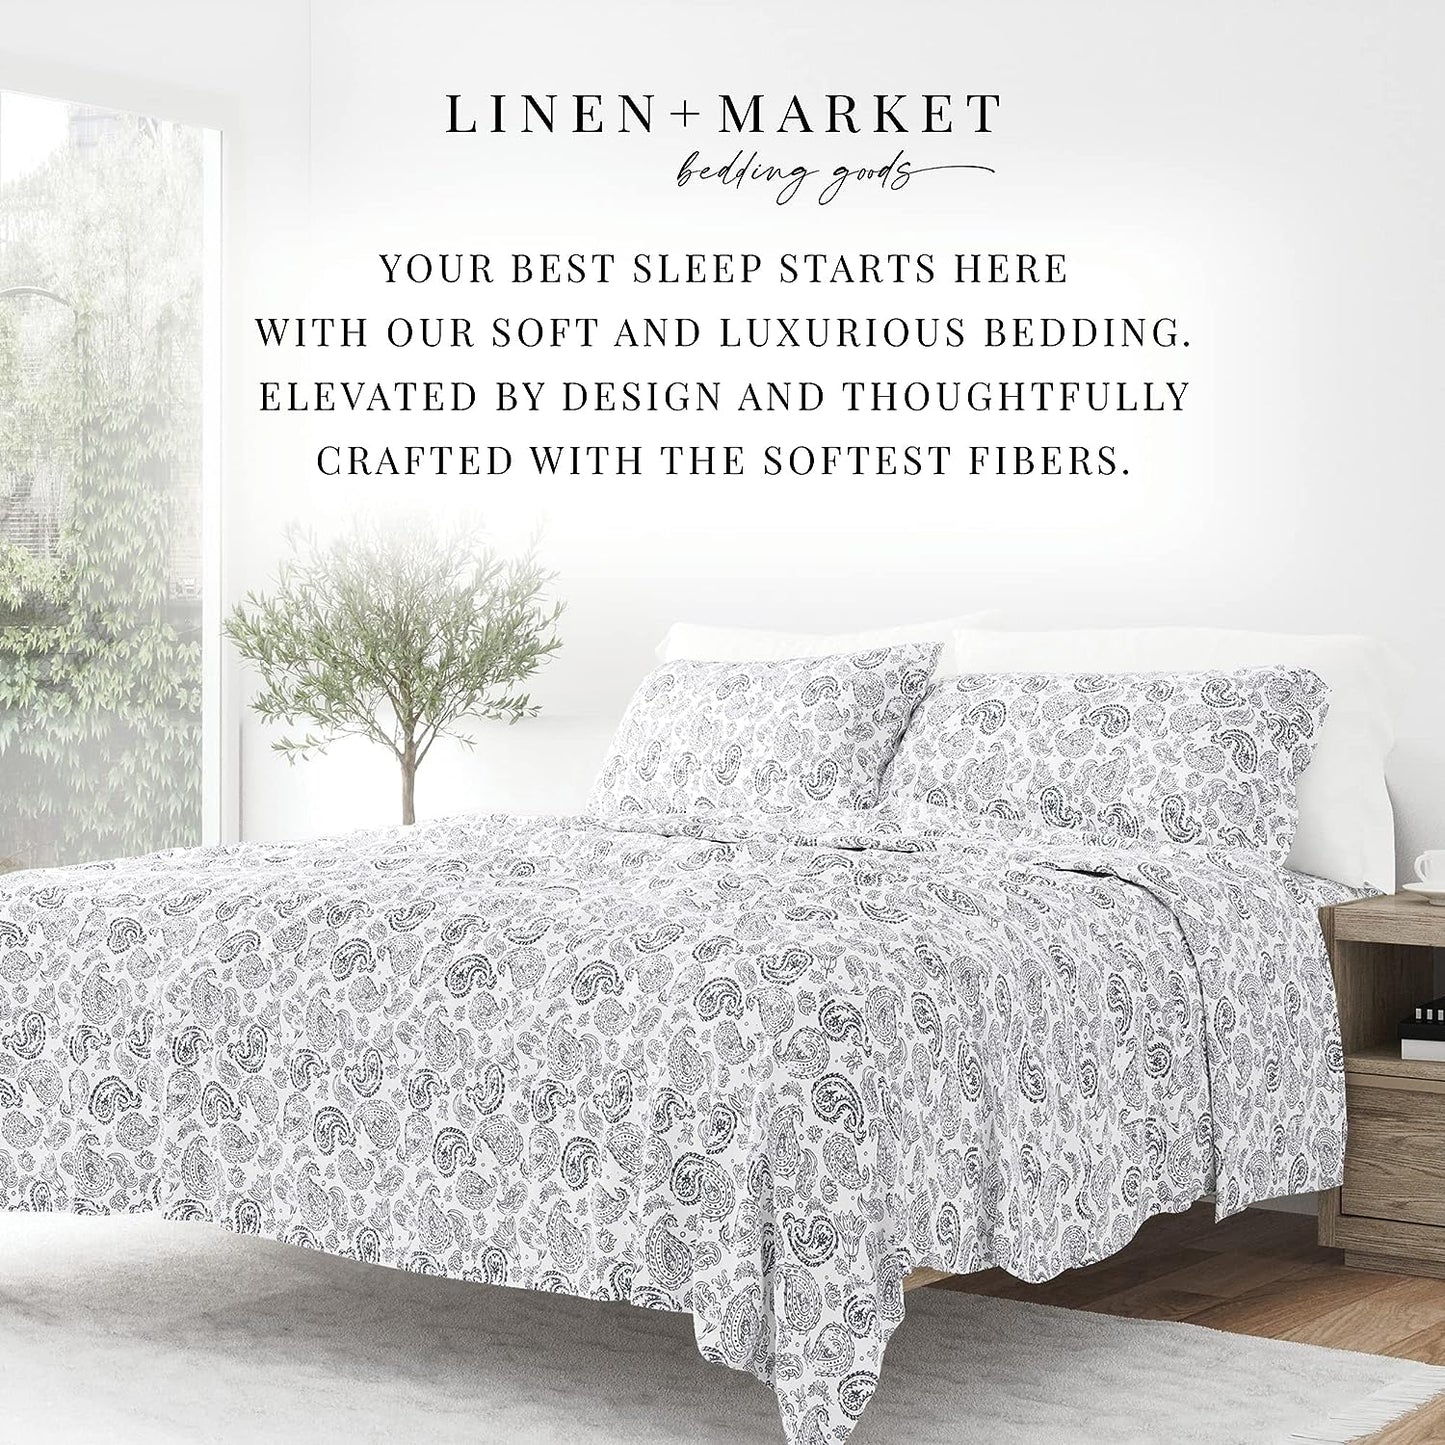 Linen Market 4 Piece Queen Bedding Sheet Set (Navy Floral) - Sleep Better Than Ever with These Ultra-Soft & Cooling Bed Sheets for Your Queen Size Bed - Deep Pocket Fits 16" Mattress